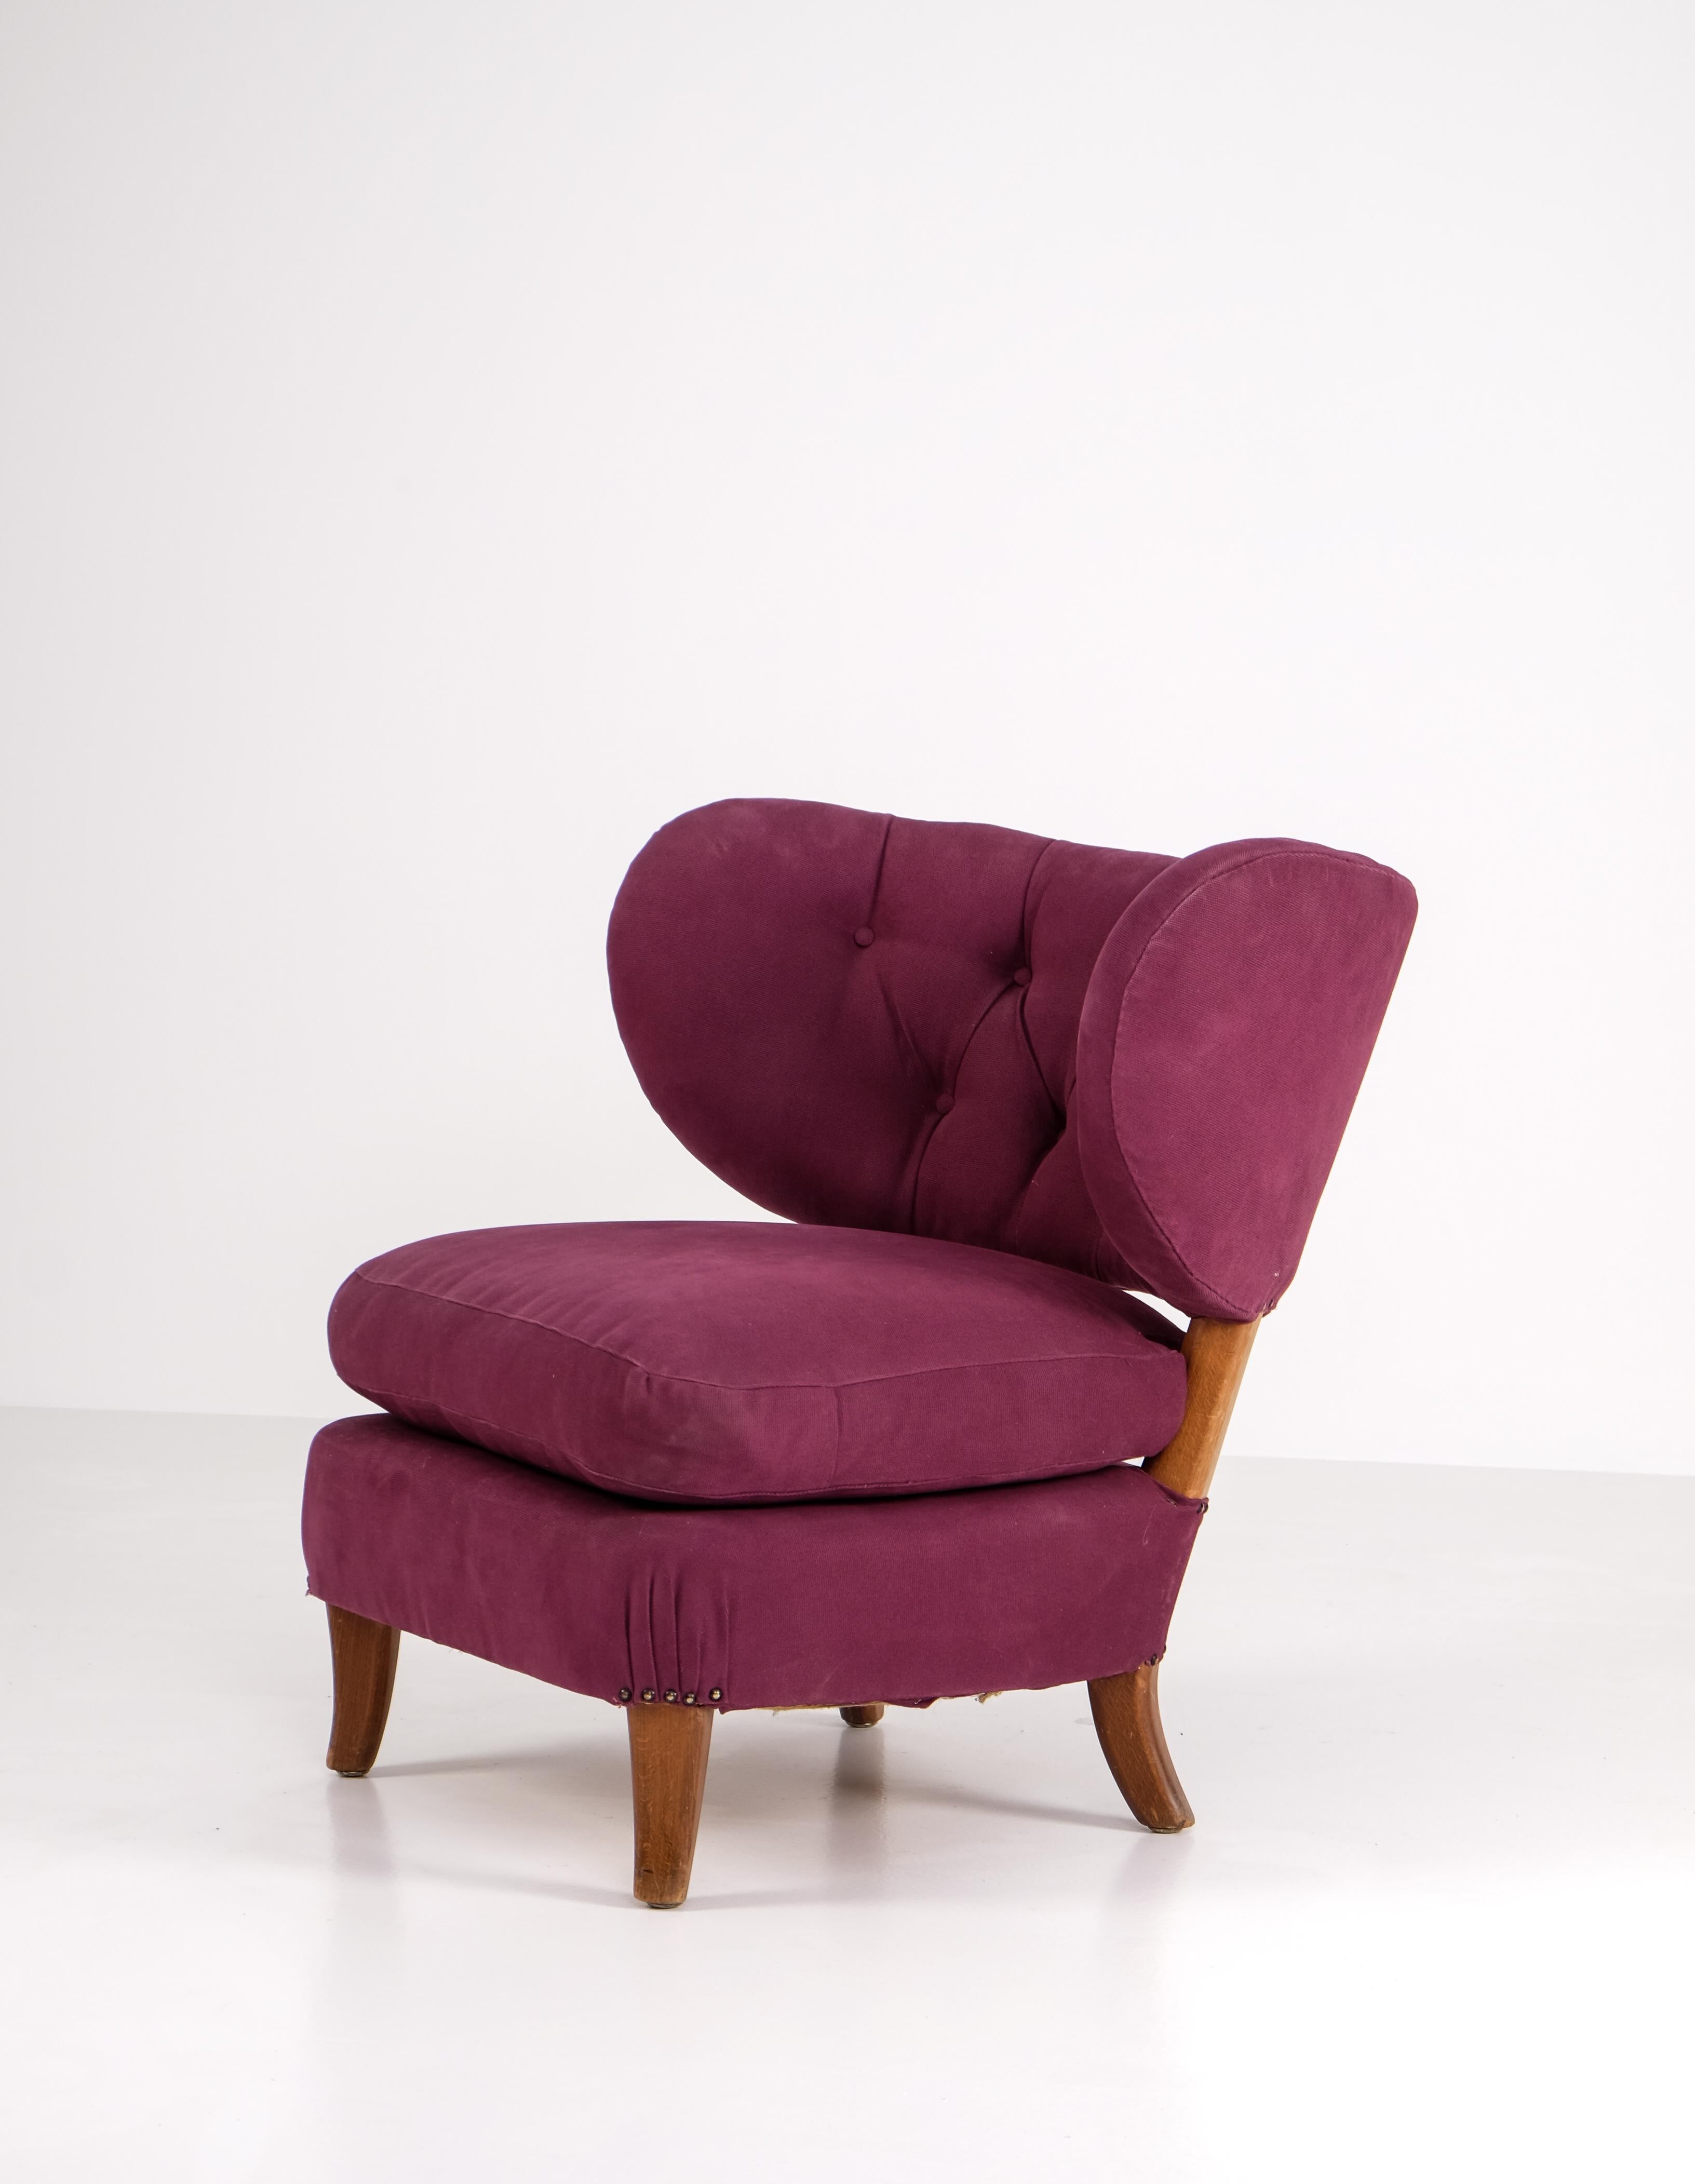 Mid-20th Century Otto Schulz Chair, Sweden, 1940s For Sale